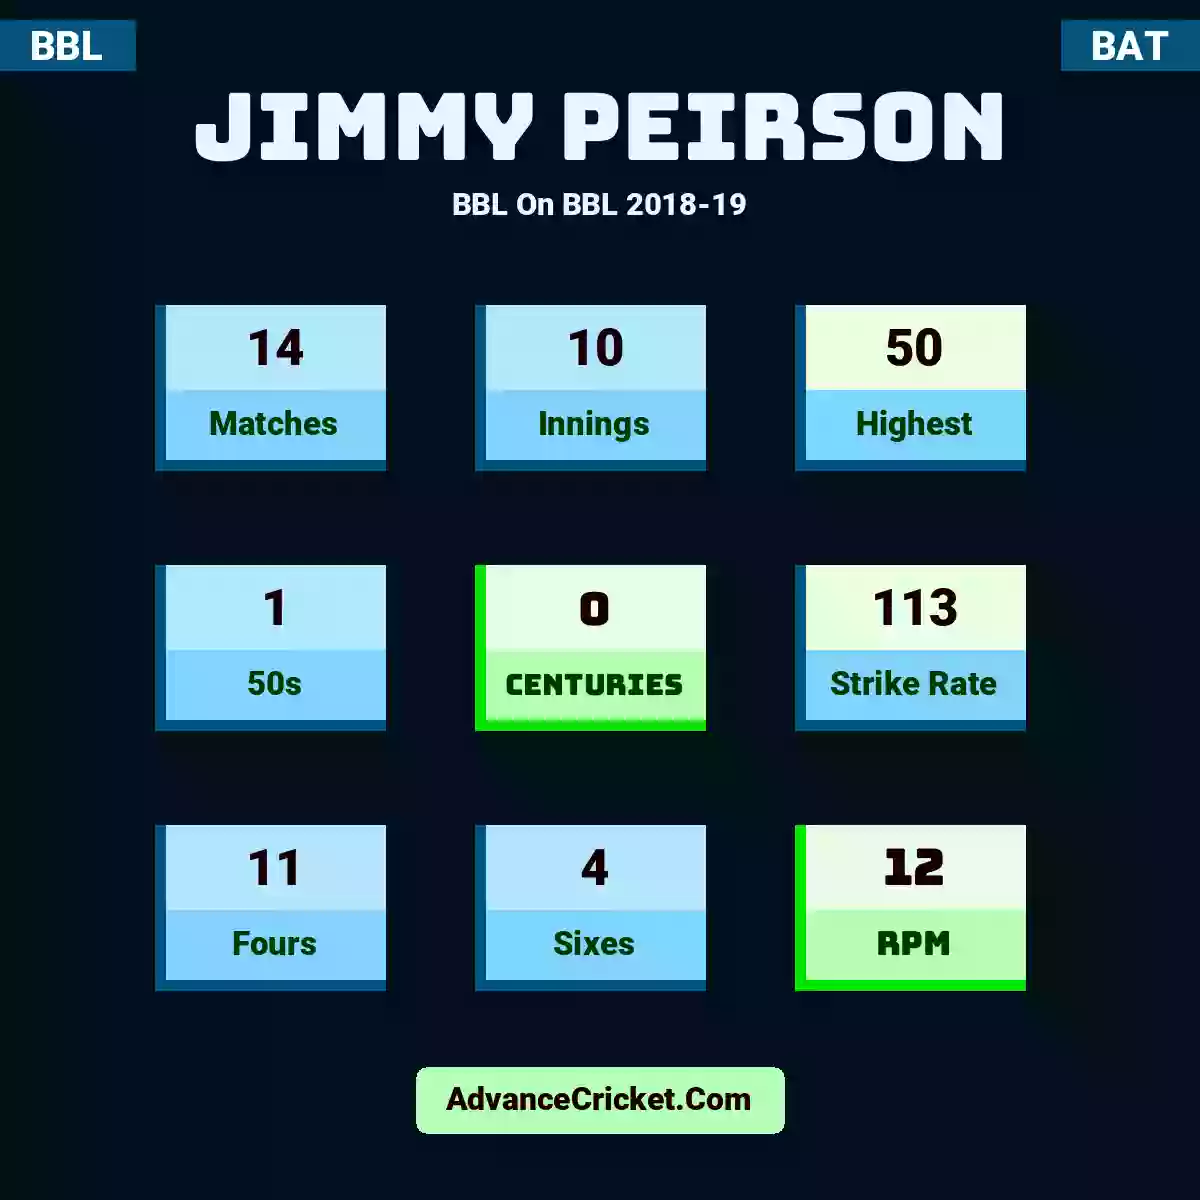 Jimmy Peirson BBL  On BBL 2018-19, Jimmy Peirson played 14 matches, scored 50 runs as highest, 1 half-centuries, and 0 centuries, with a strike rate of 113. J.Peirson hit 11 fours and 4 sixes, with an RPM of 12.